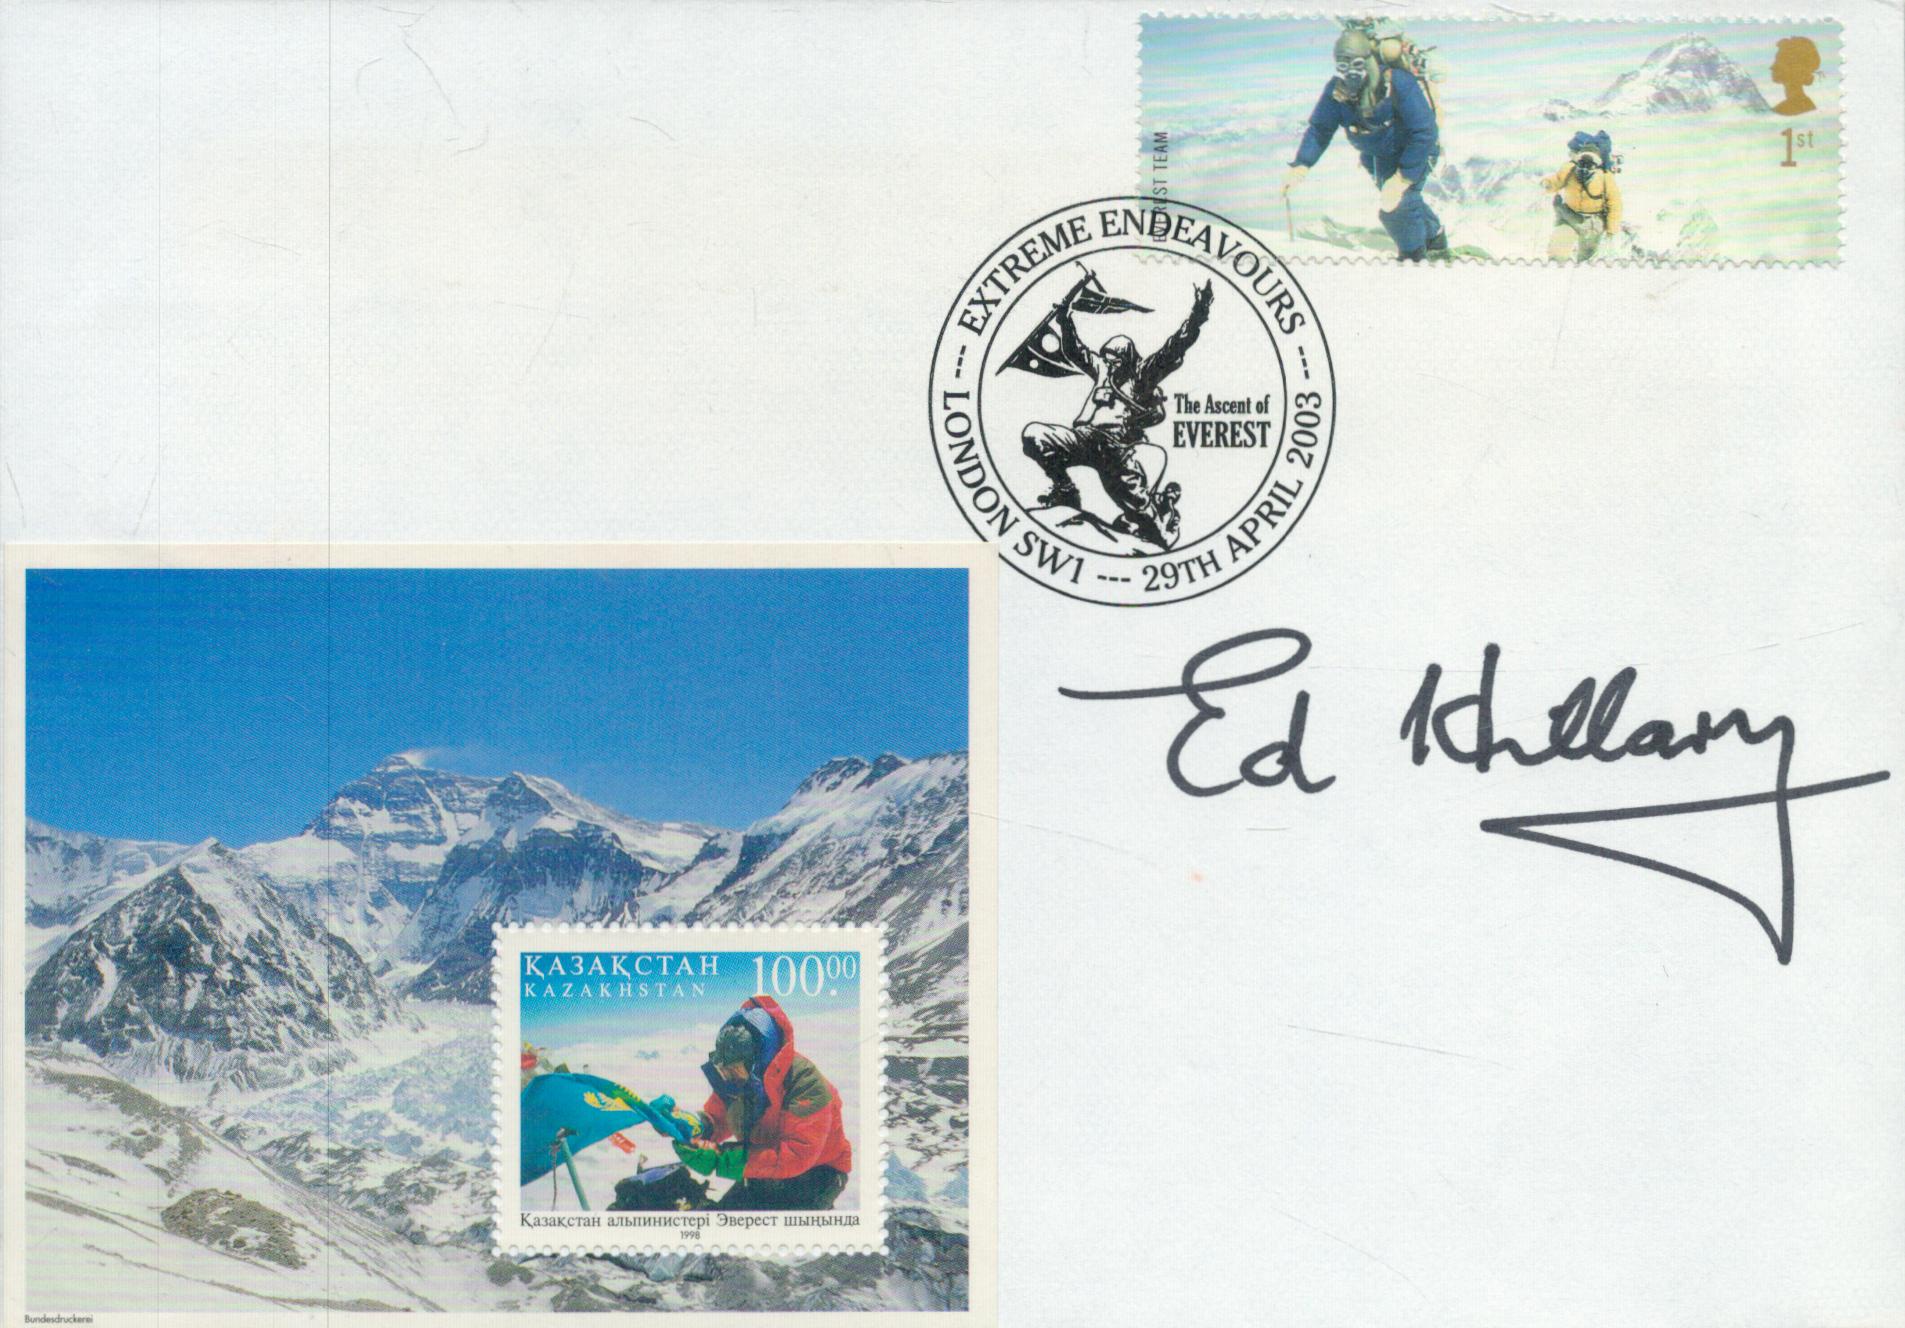 Sir Edmund Hillary signed 2003 Extreme Endeavours FDC. Sir Edmund Percival Hillary KG ONZ KBE was